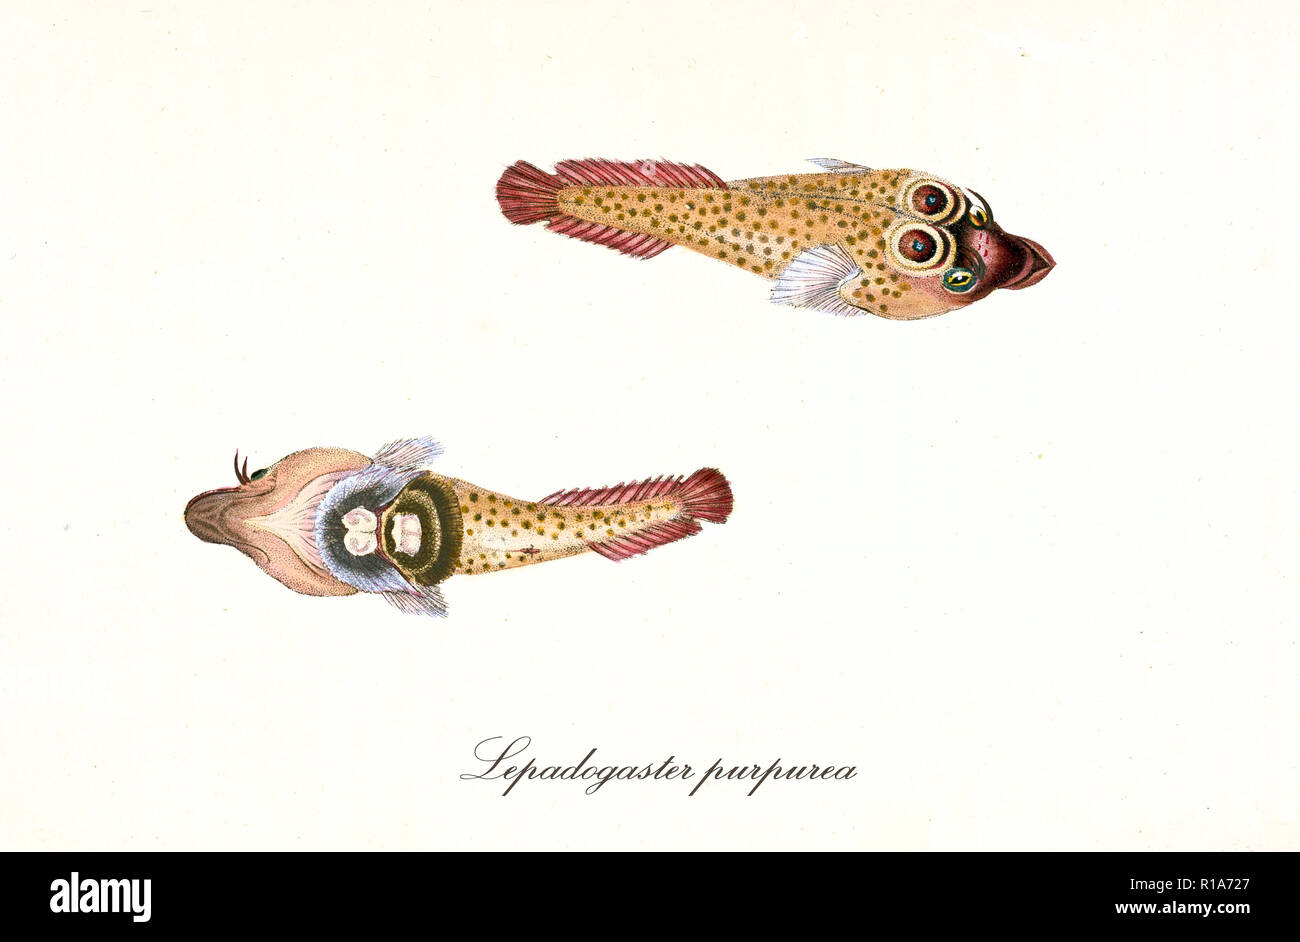 Ancient colorful illustration of Cornish Sucker (Lepadogaster purpurea), Top view of two exemplars with their maculate skin, isolated elements on white background. By Edward Donovan. London 1802 Stock Photo